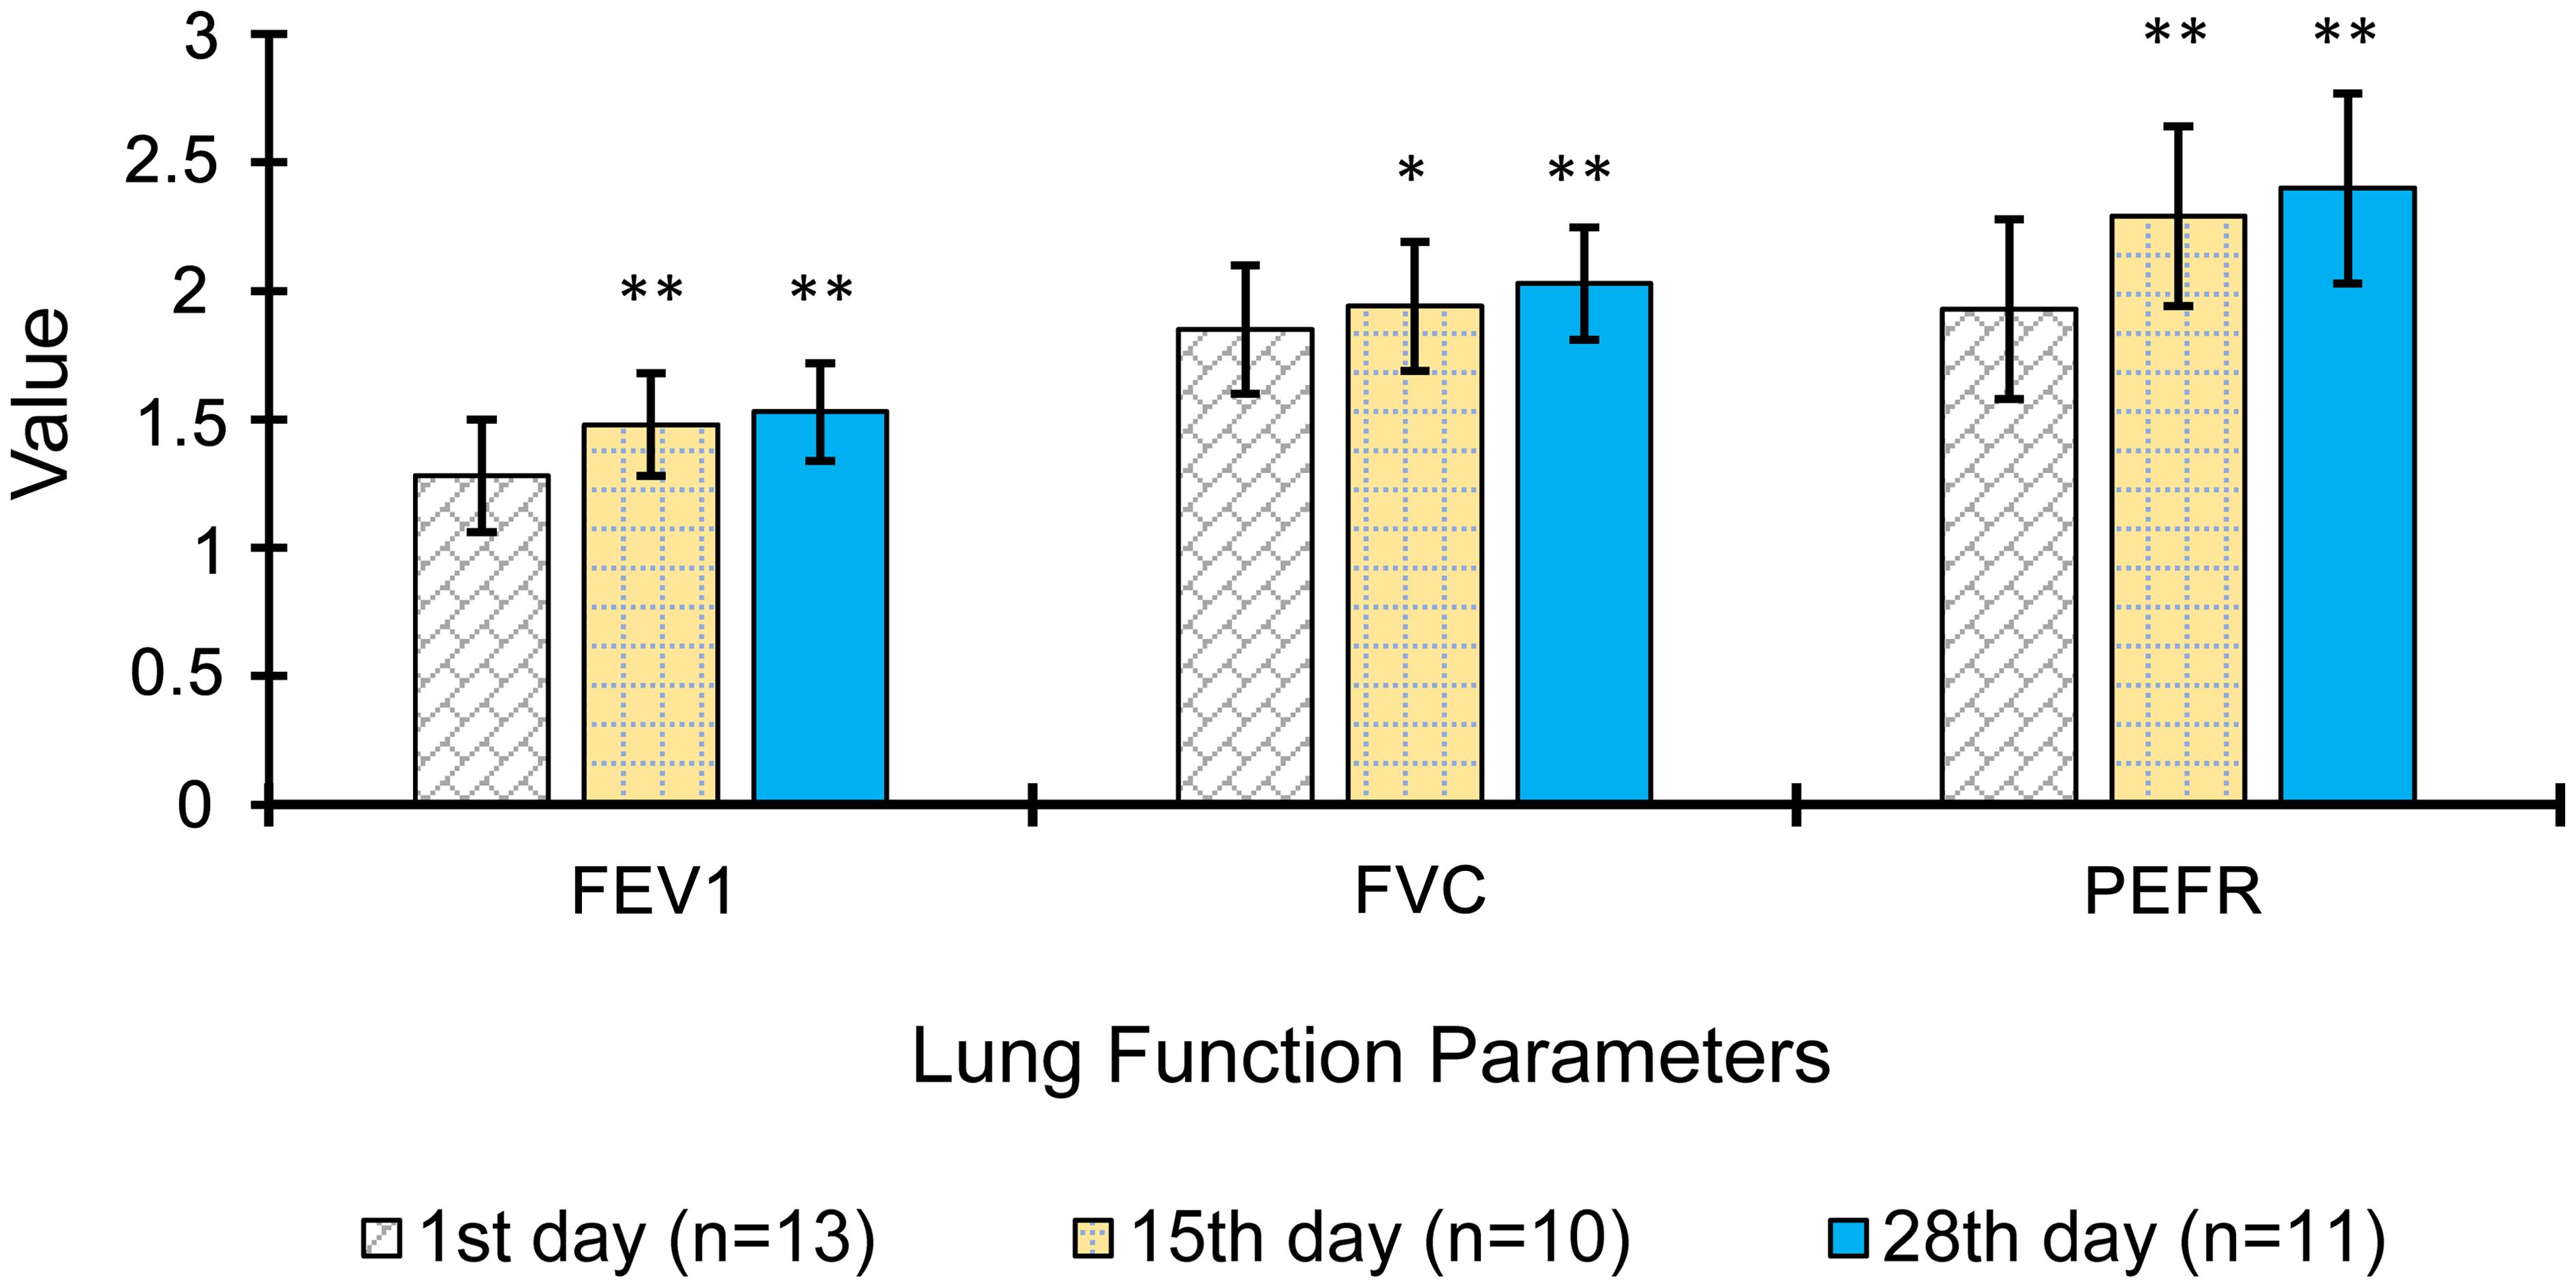 Effects of the test drug on lung function parameters.